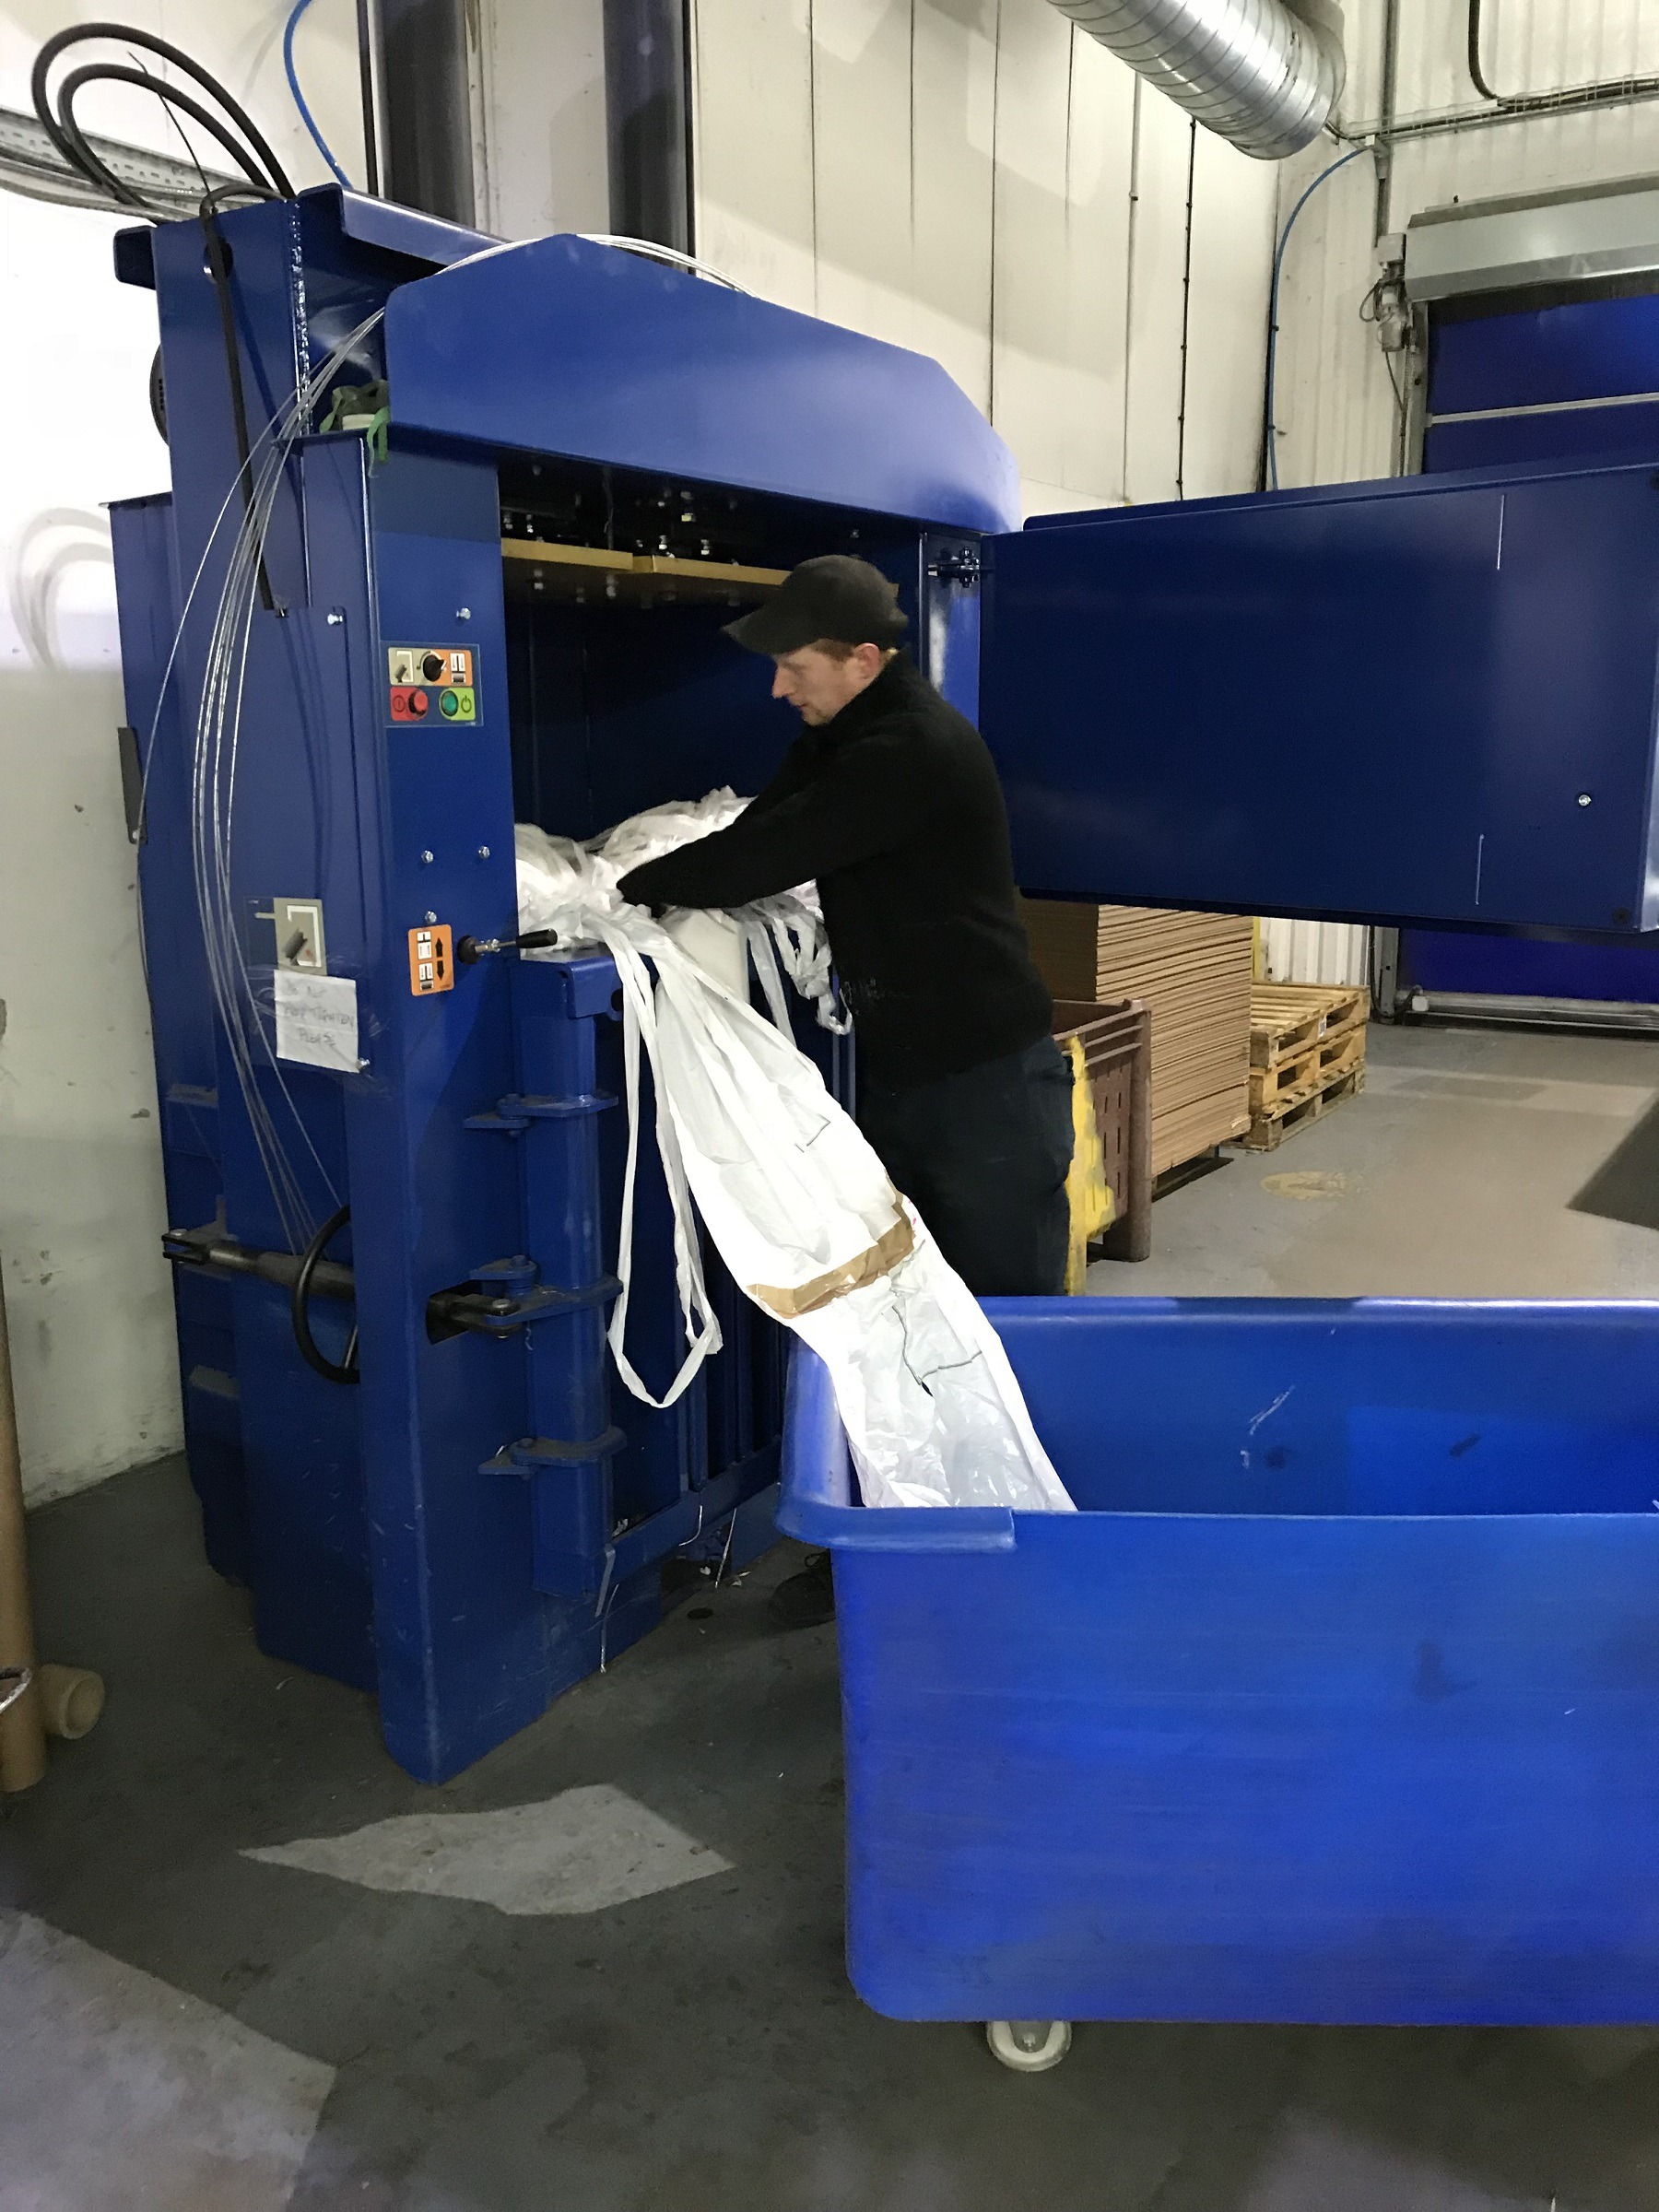 Printing company returns to Riverside for baling needs